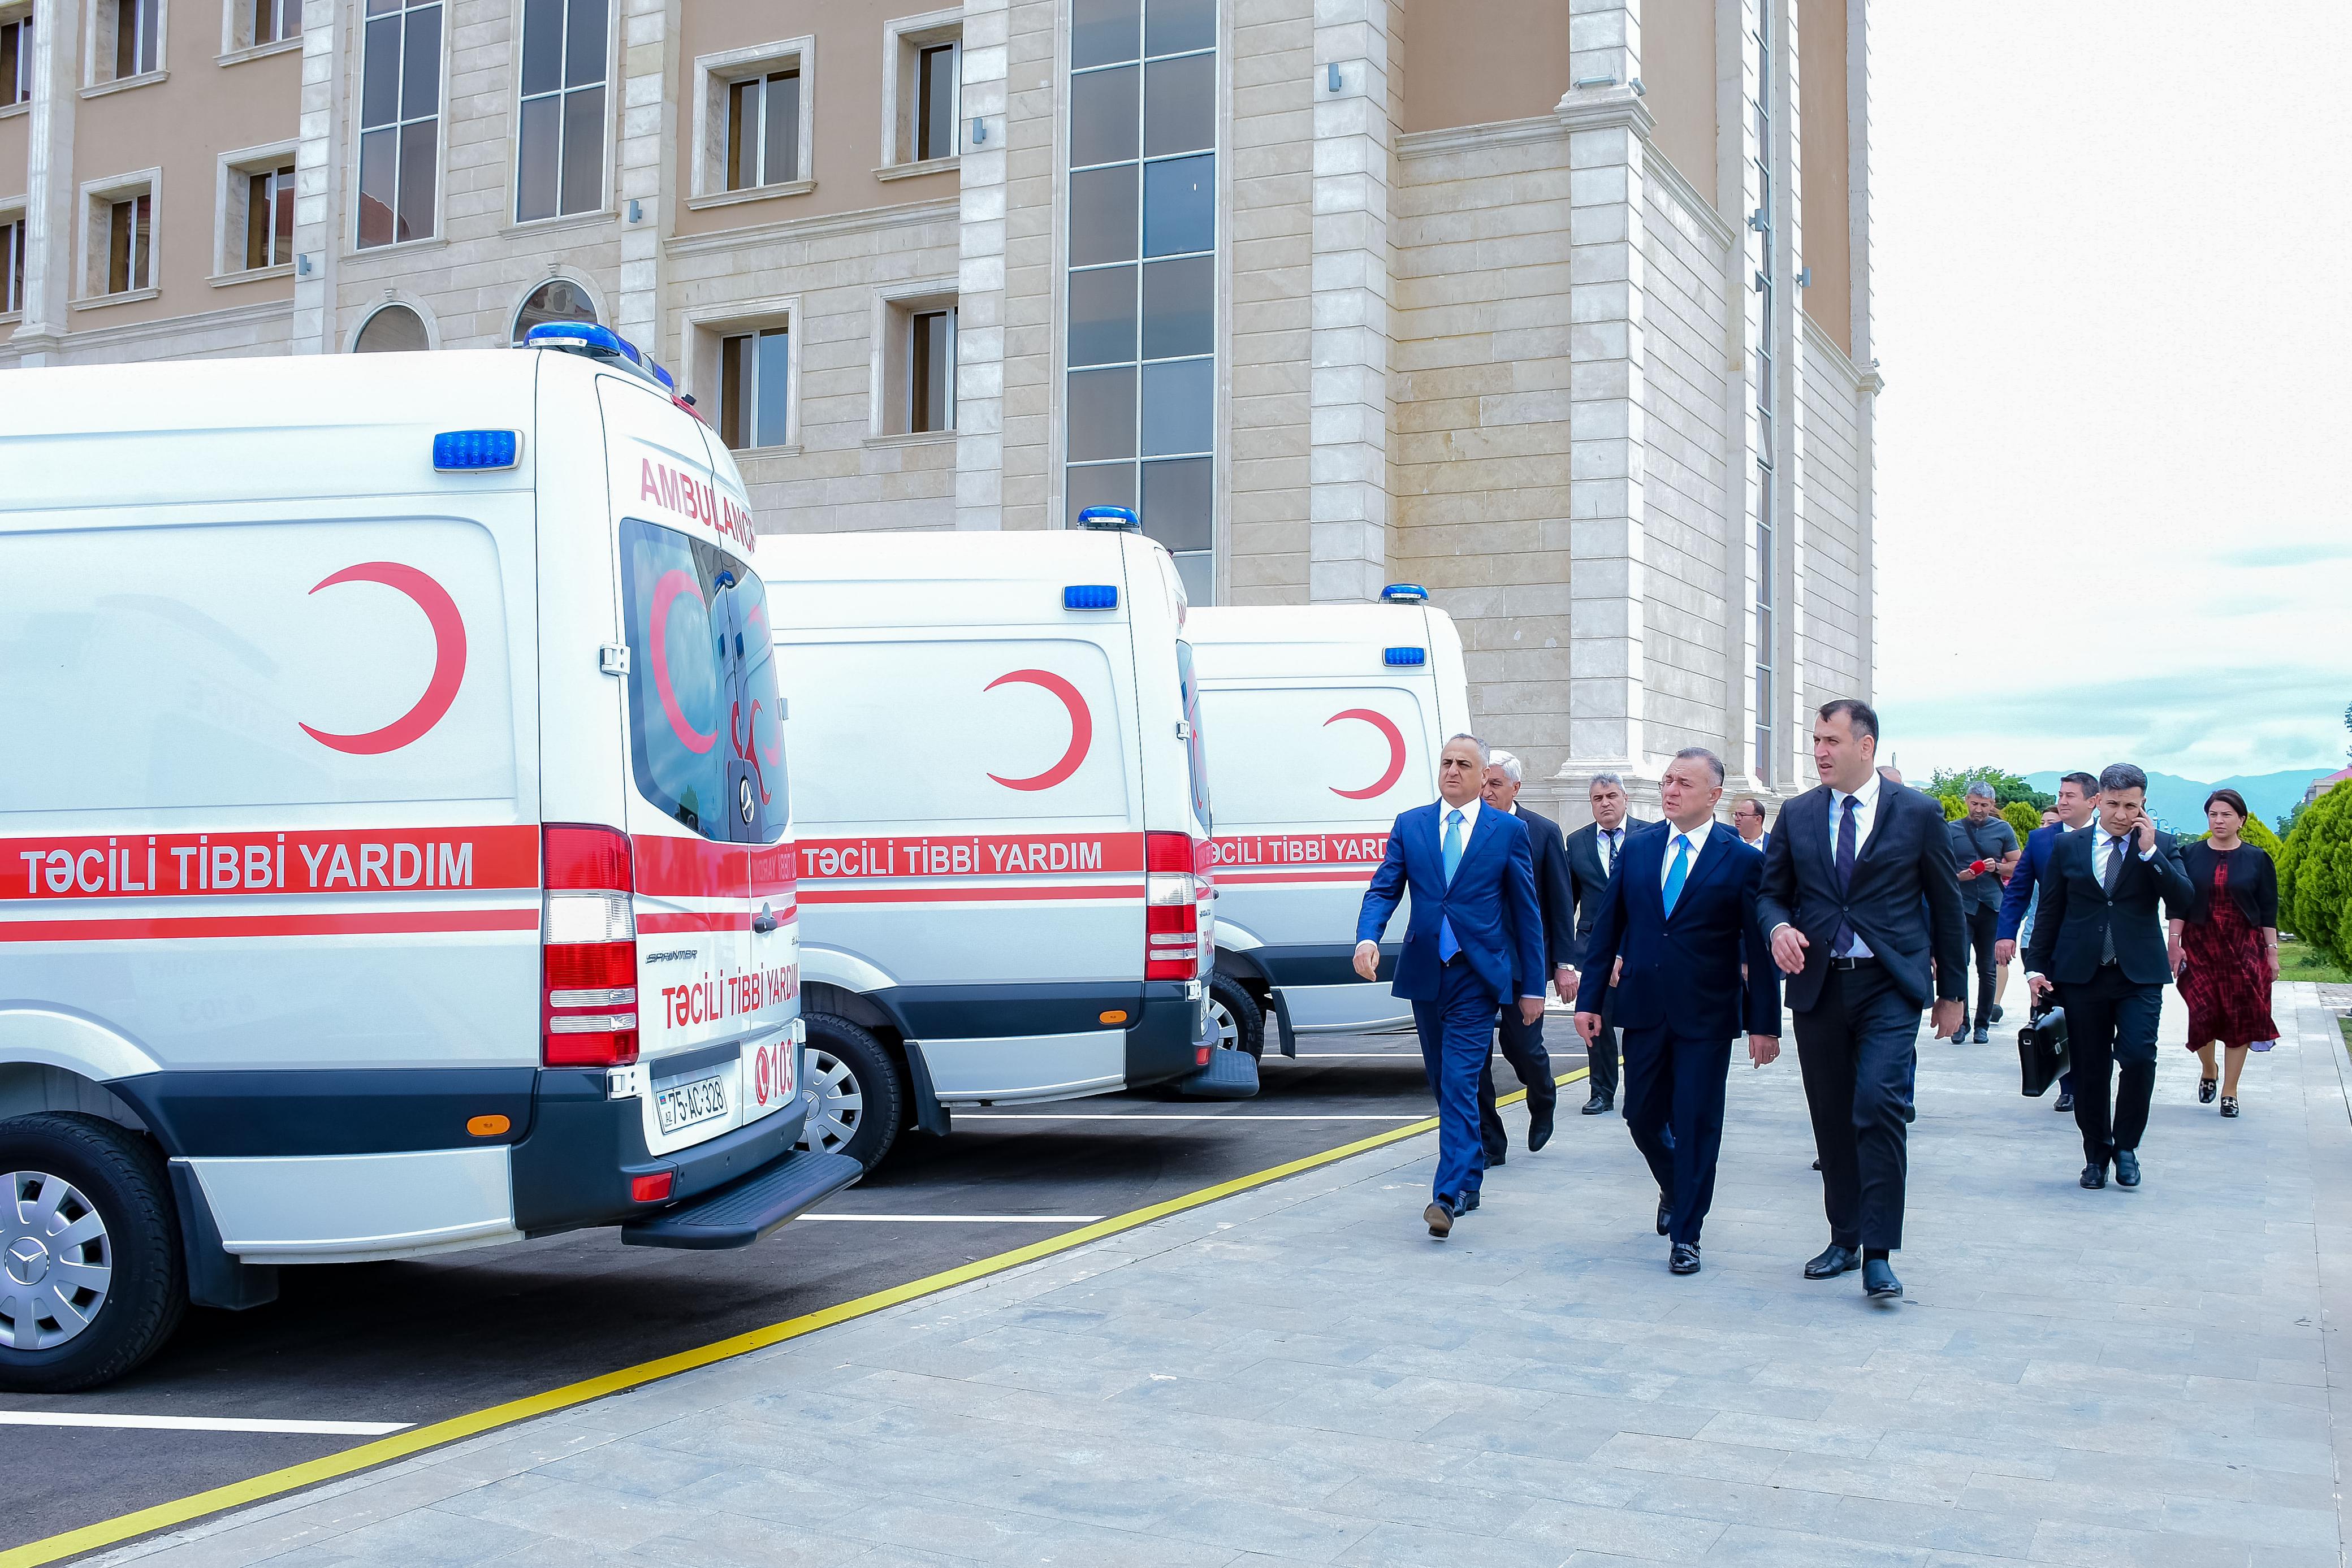 a group of people walking down a street next to a white ambulance